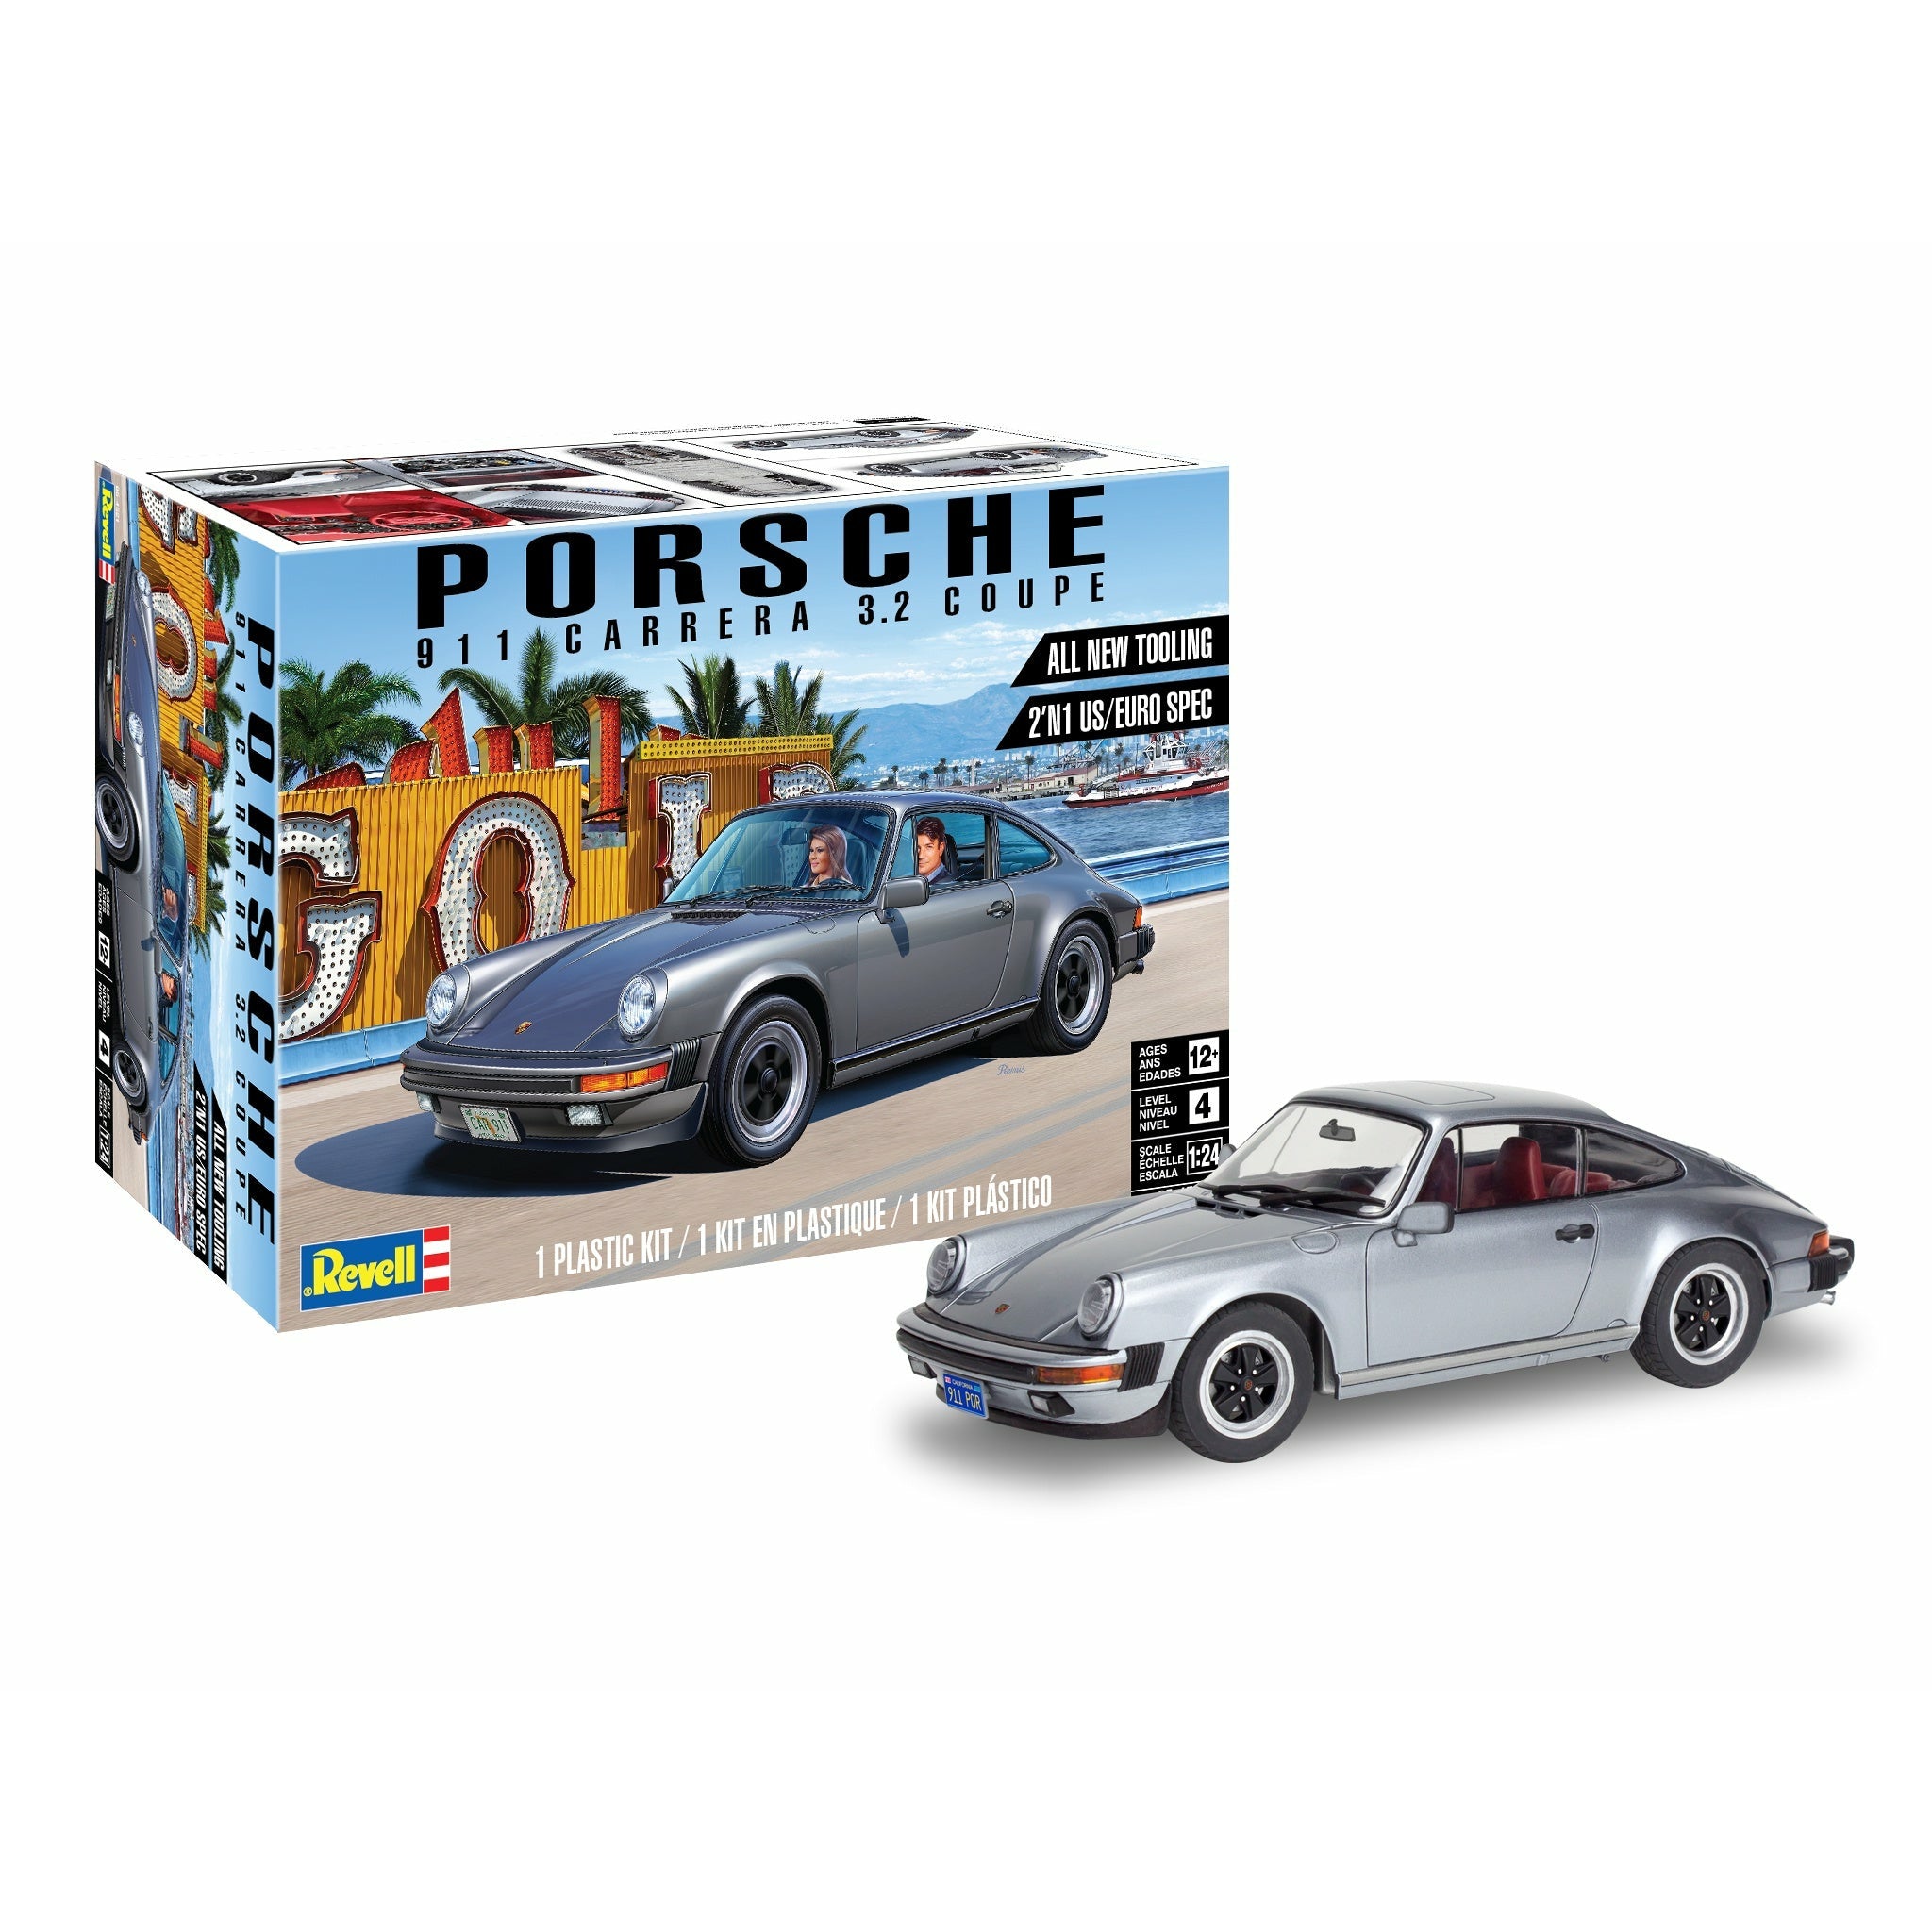 Porsche 911 Carrera 3.2 Coupe 1/24 Model Car Kit #4521 by Revell